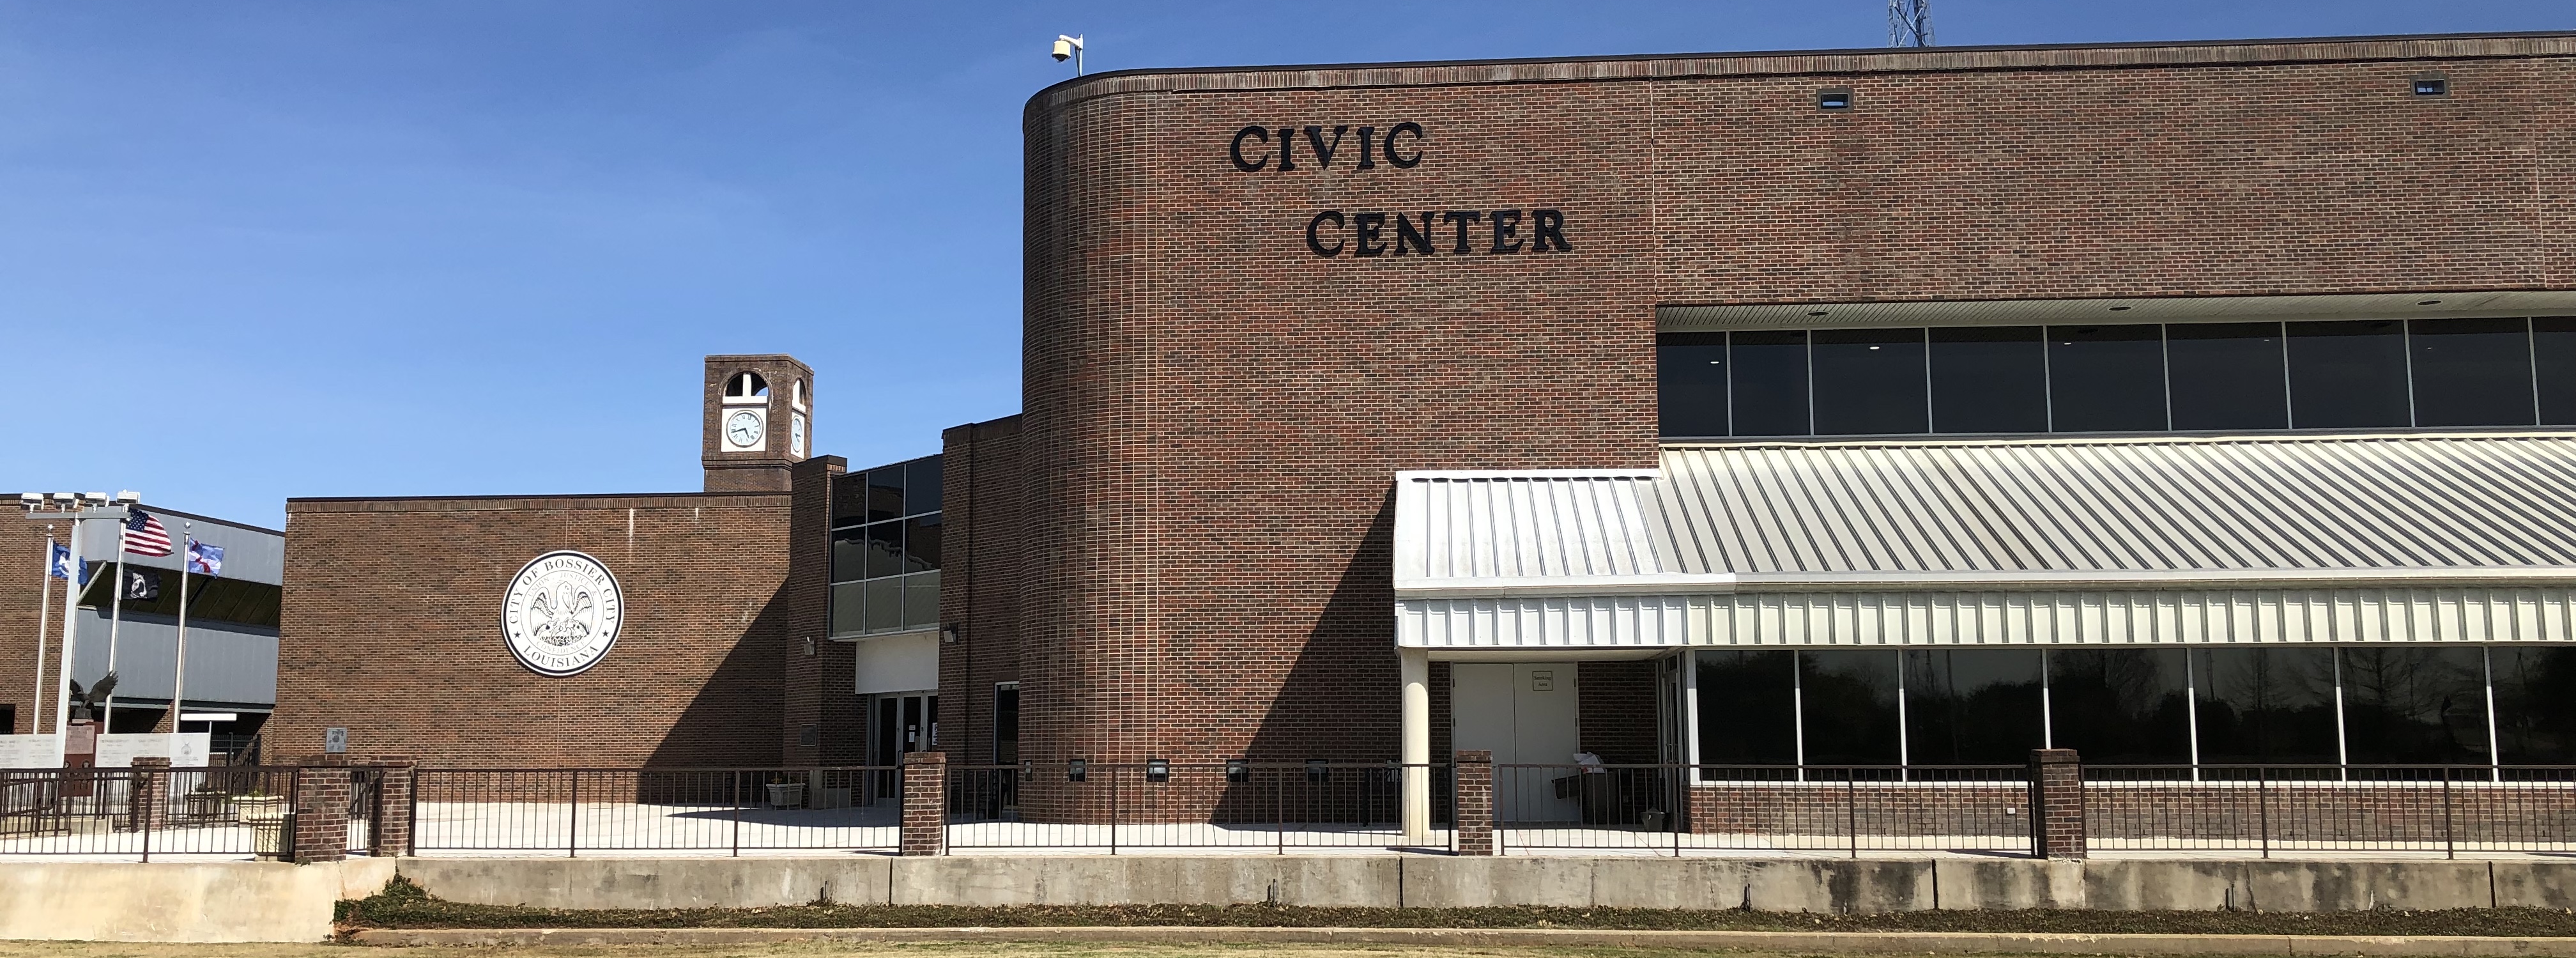 5 Facts You Didn’t Know About the Bossier Civic Center